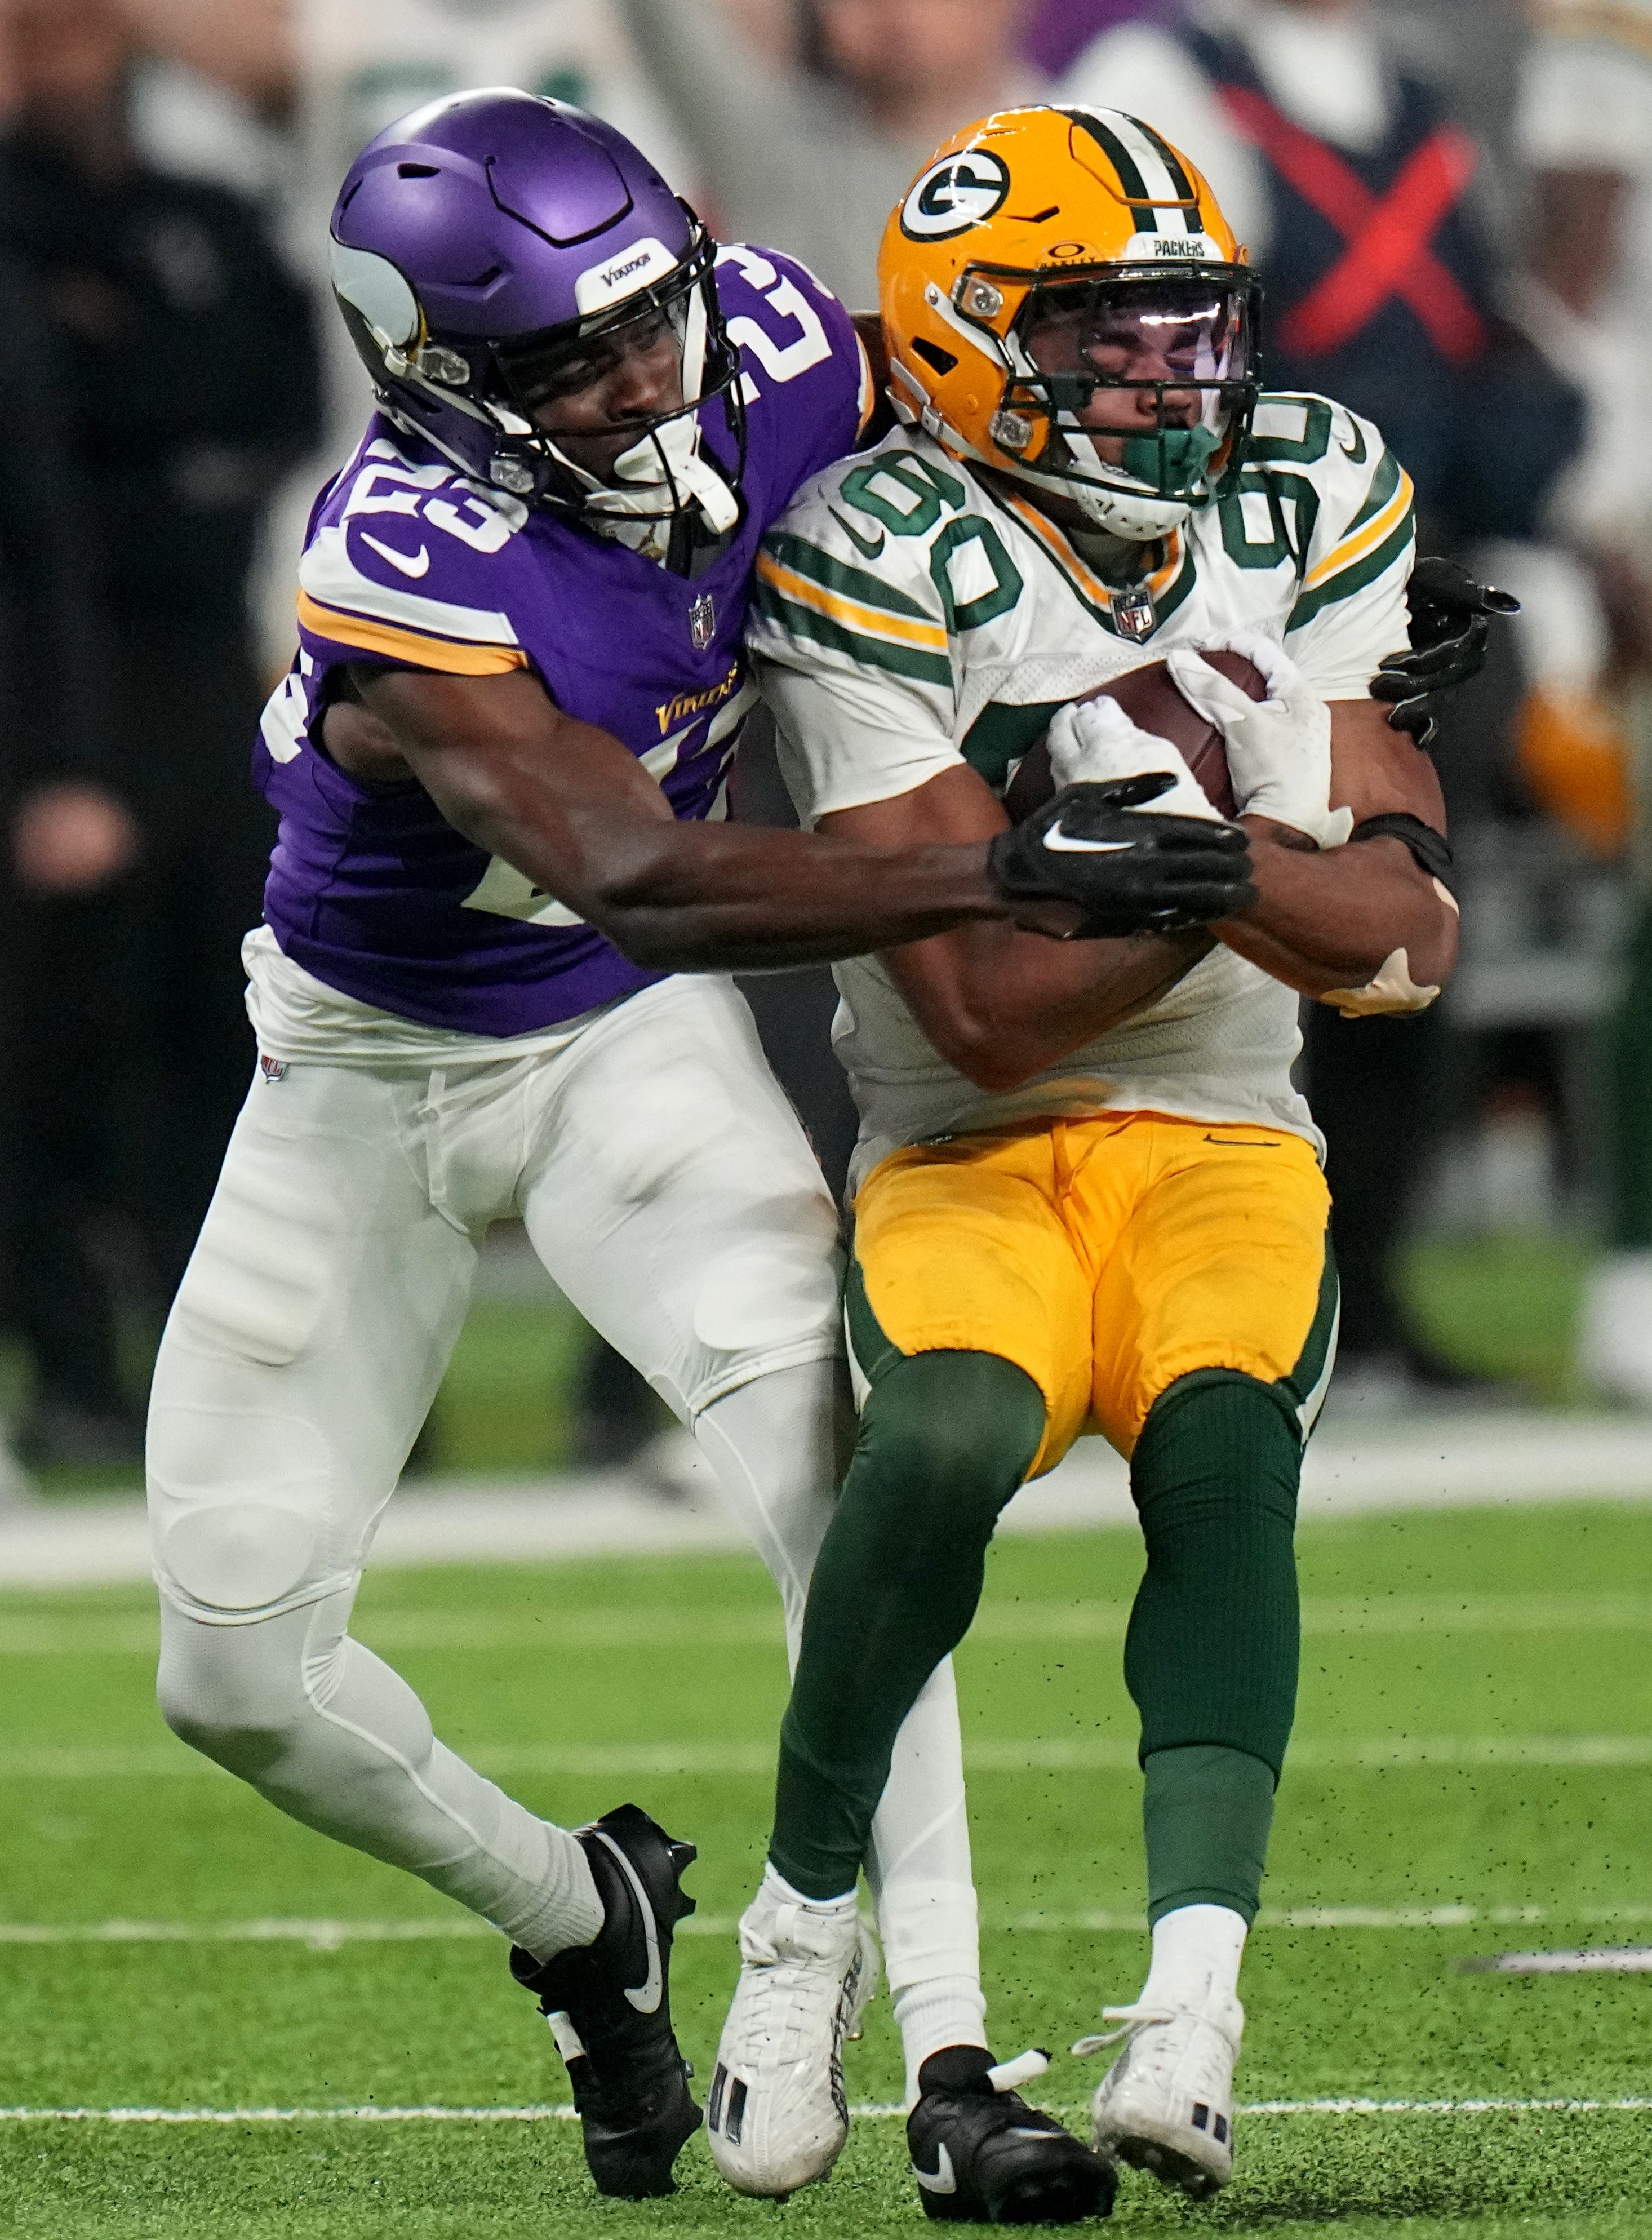 Green Bay Packers wide receiver Bo Melton (80) catches a 37-yard before being tackled by Minnesota Vikings cornerback Andrew Booth Jr. (23) during the fourth quarter of their game Sunday, December 31, 2023 at U.S. Bank Stadium in Minneapolis, Minnesota. The Green Bay Packers beat the Minnesota Vikings 33-10.